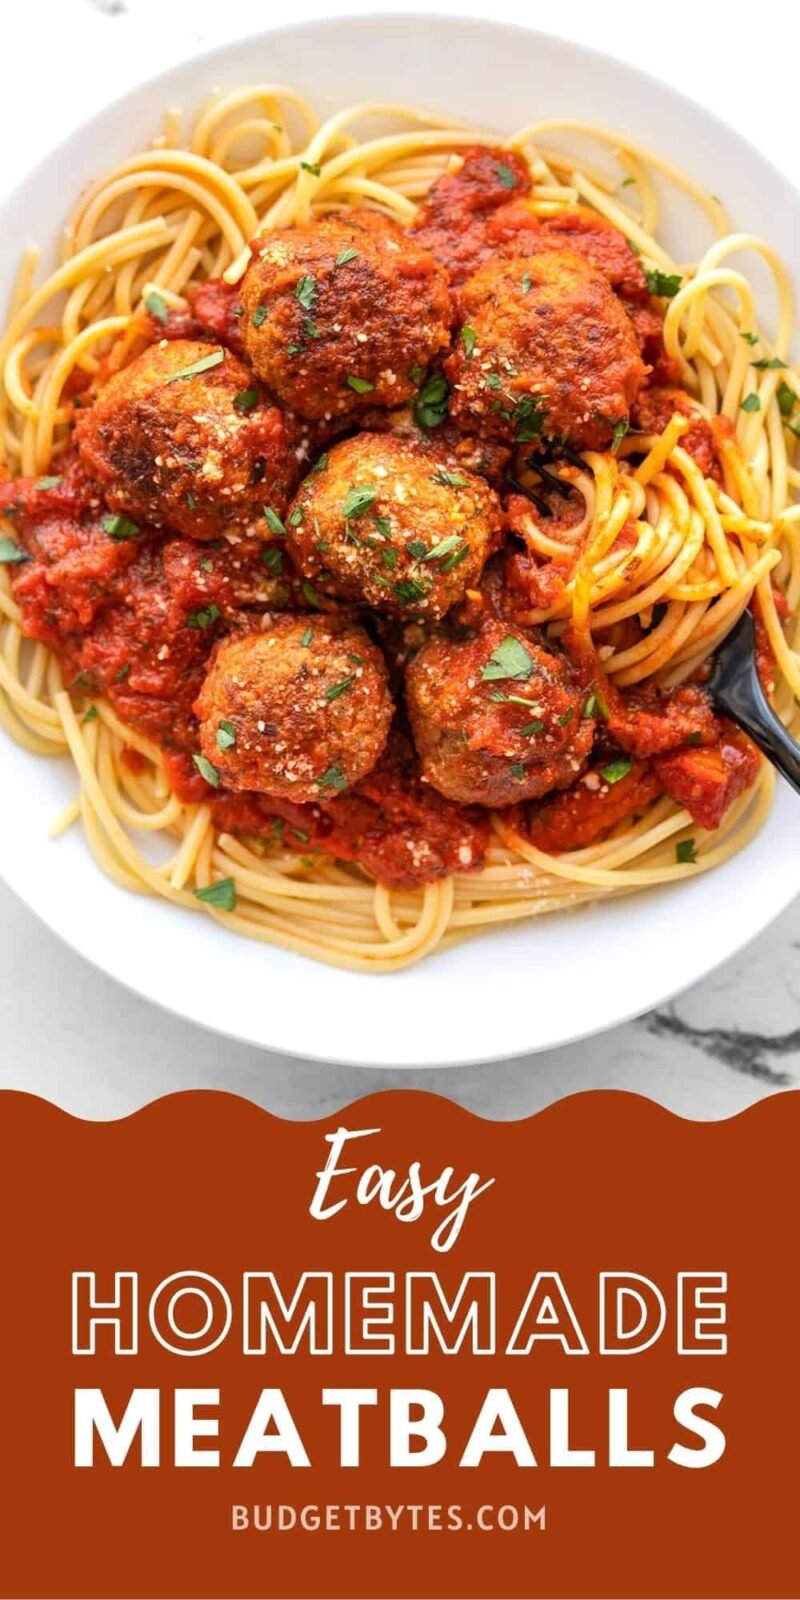 Overhead view of a plate of spaghetti with meatballs, title text at the bottom